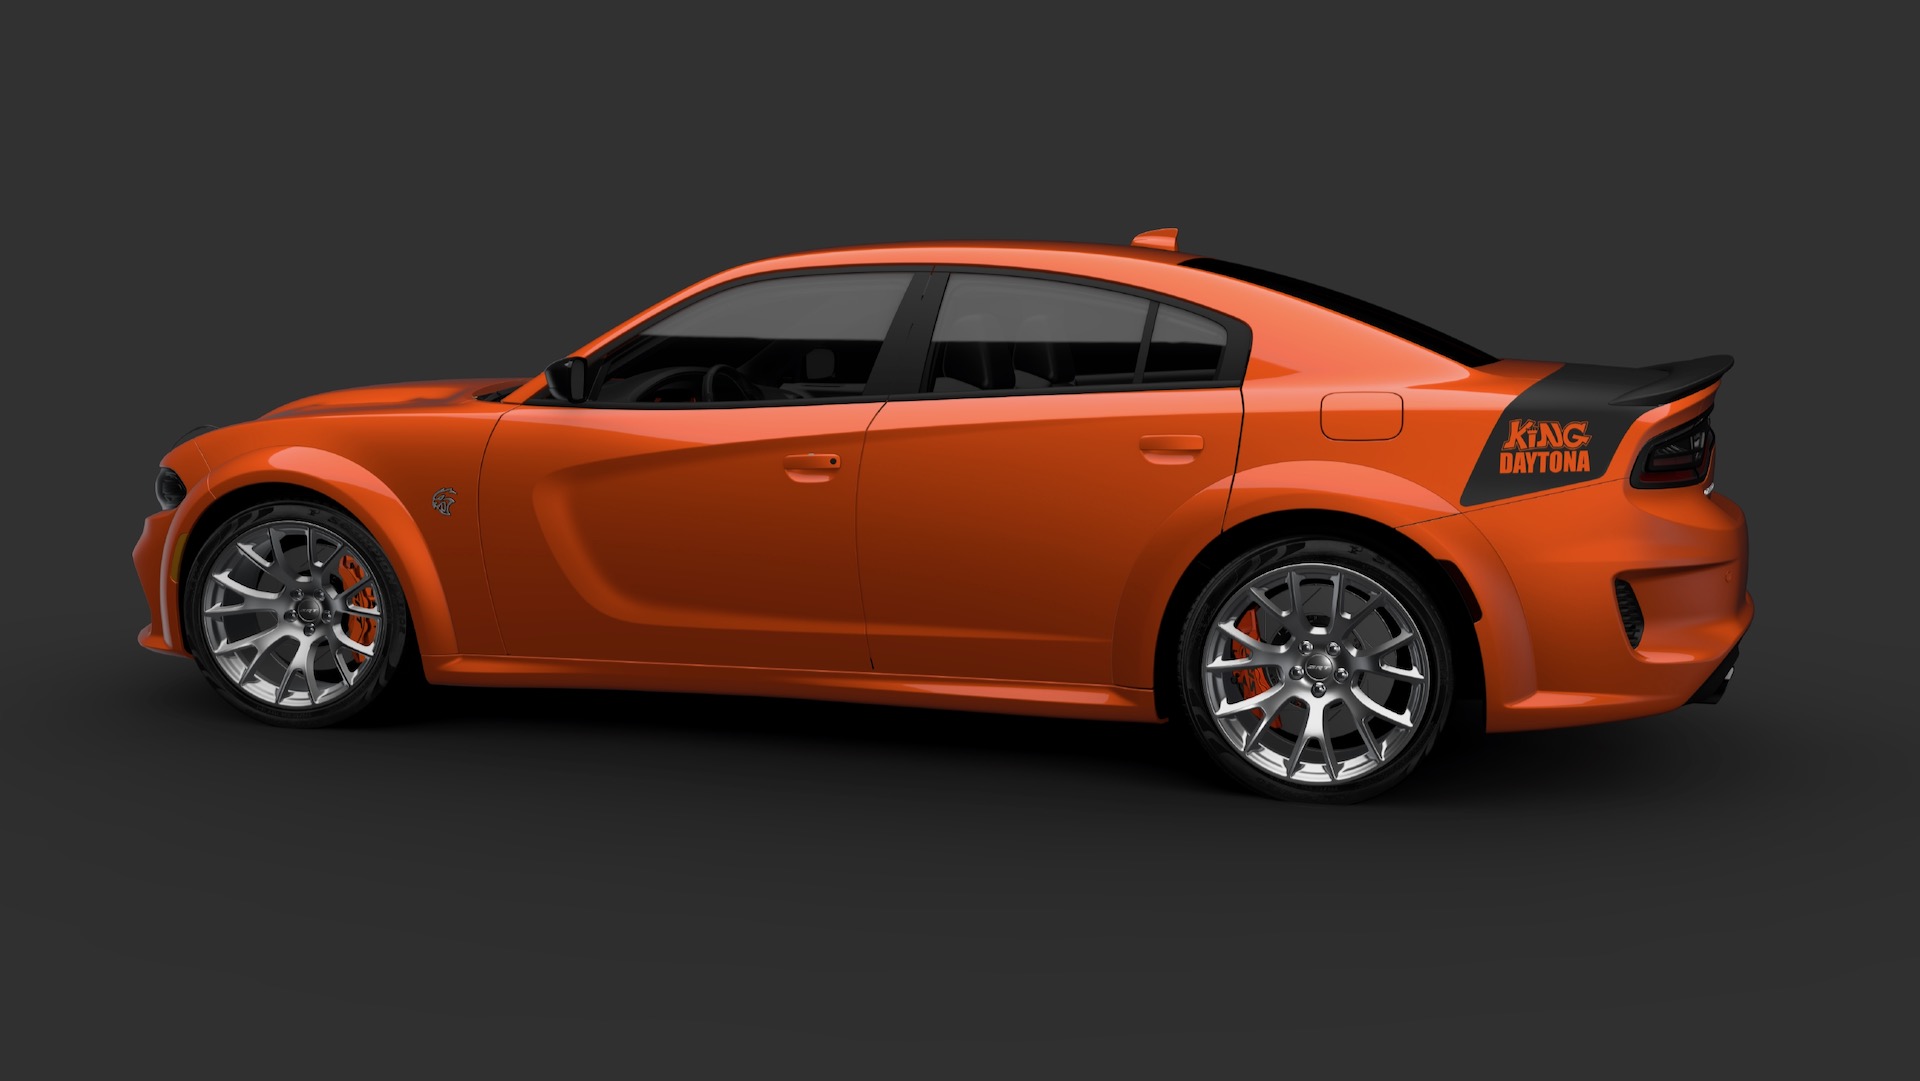 2023 Dodge Charger King Daytona arrives with 807 hp as fifth Final Name